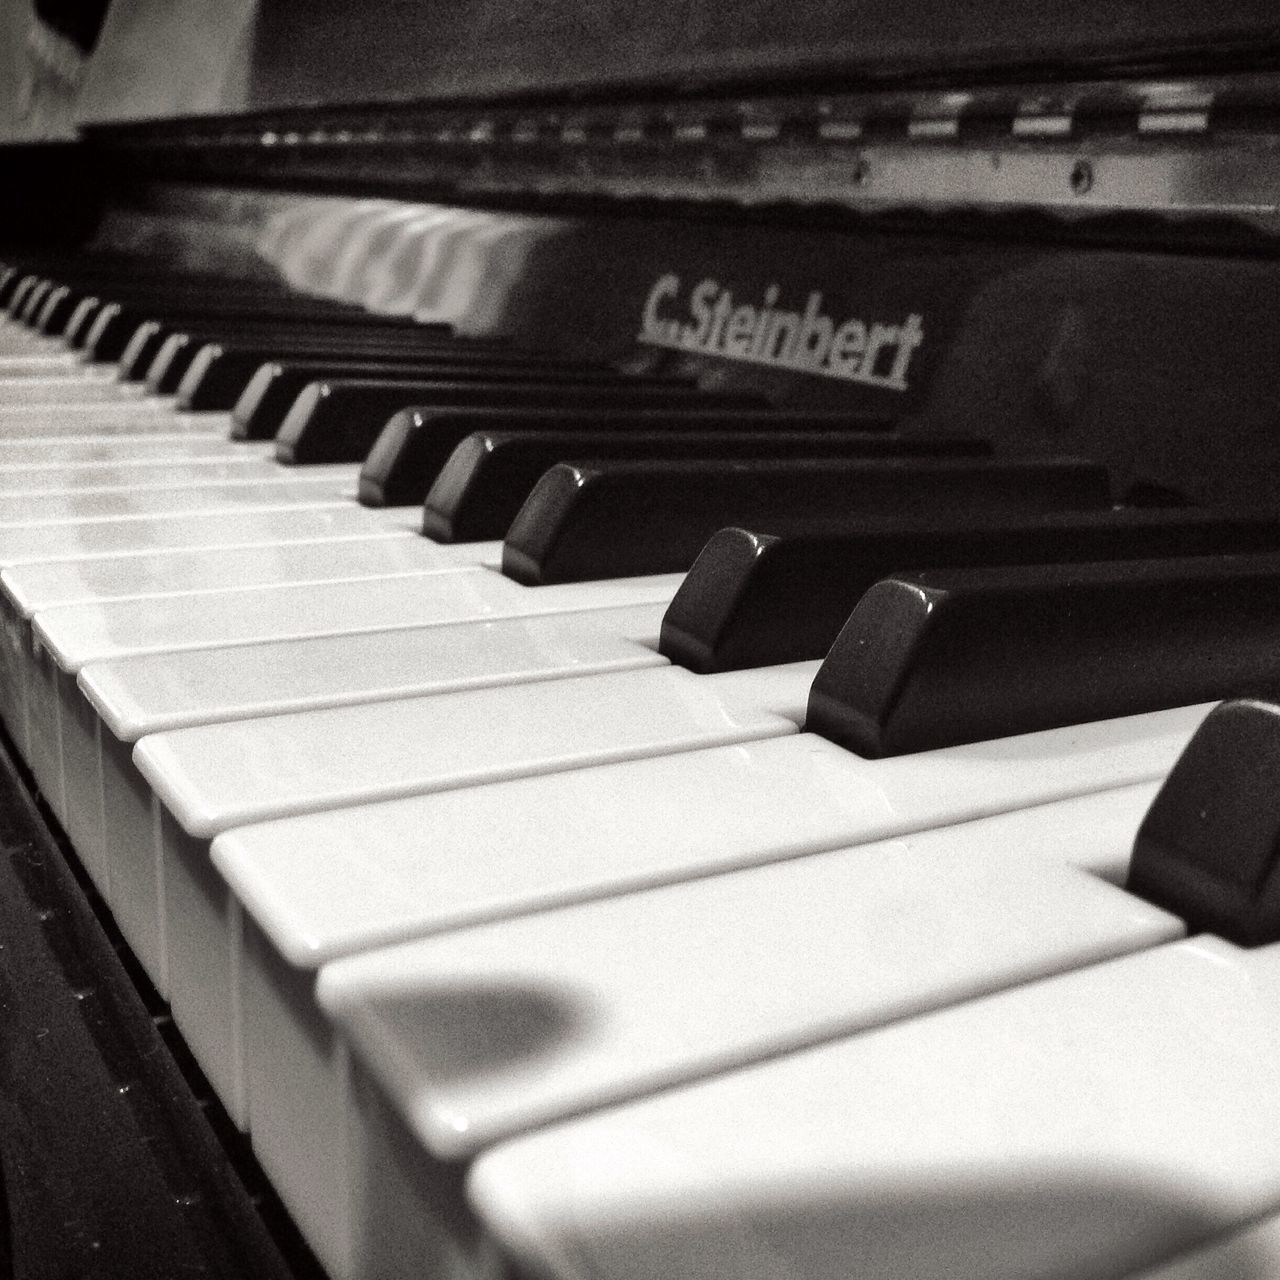 indoors, music, close-up, arts culture and entertainment, piano key, musical instrument, communication, technology, musical equipment, piano, selective focus, high angle view, in a row, still life, text, part of, no people, focus on foreground, number, connection